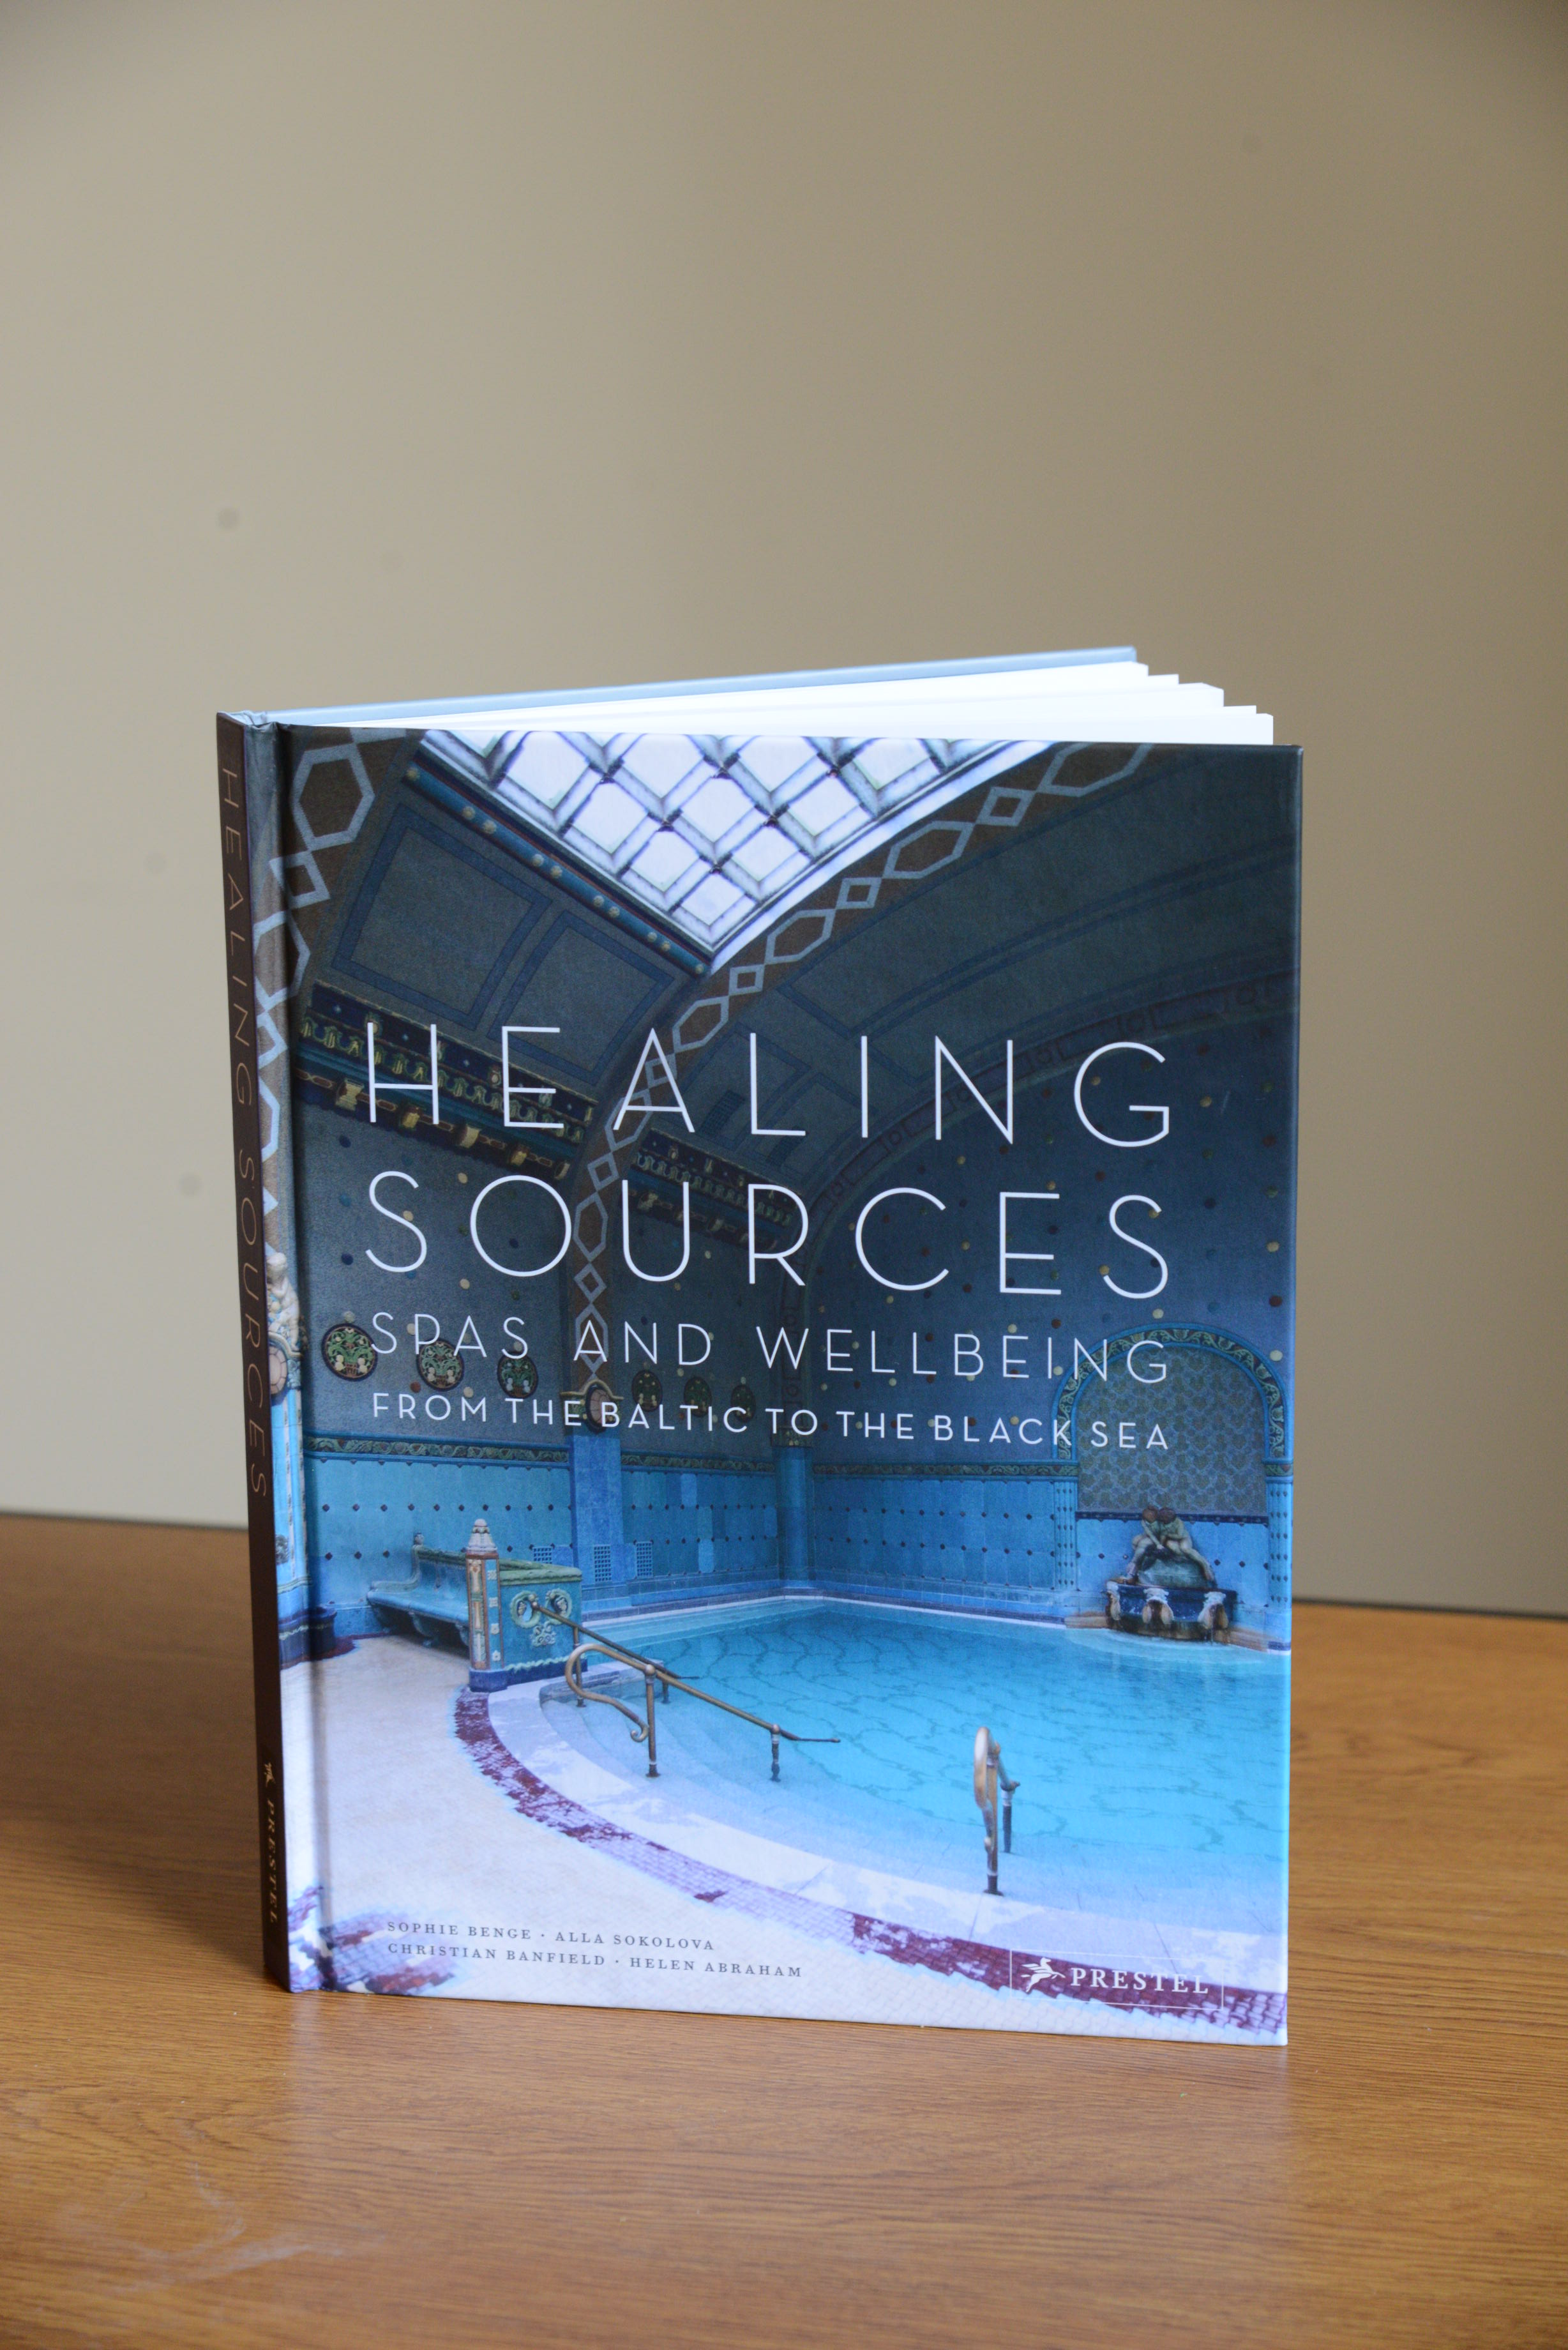 The Healing Sources